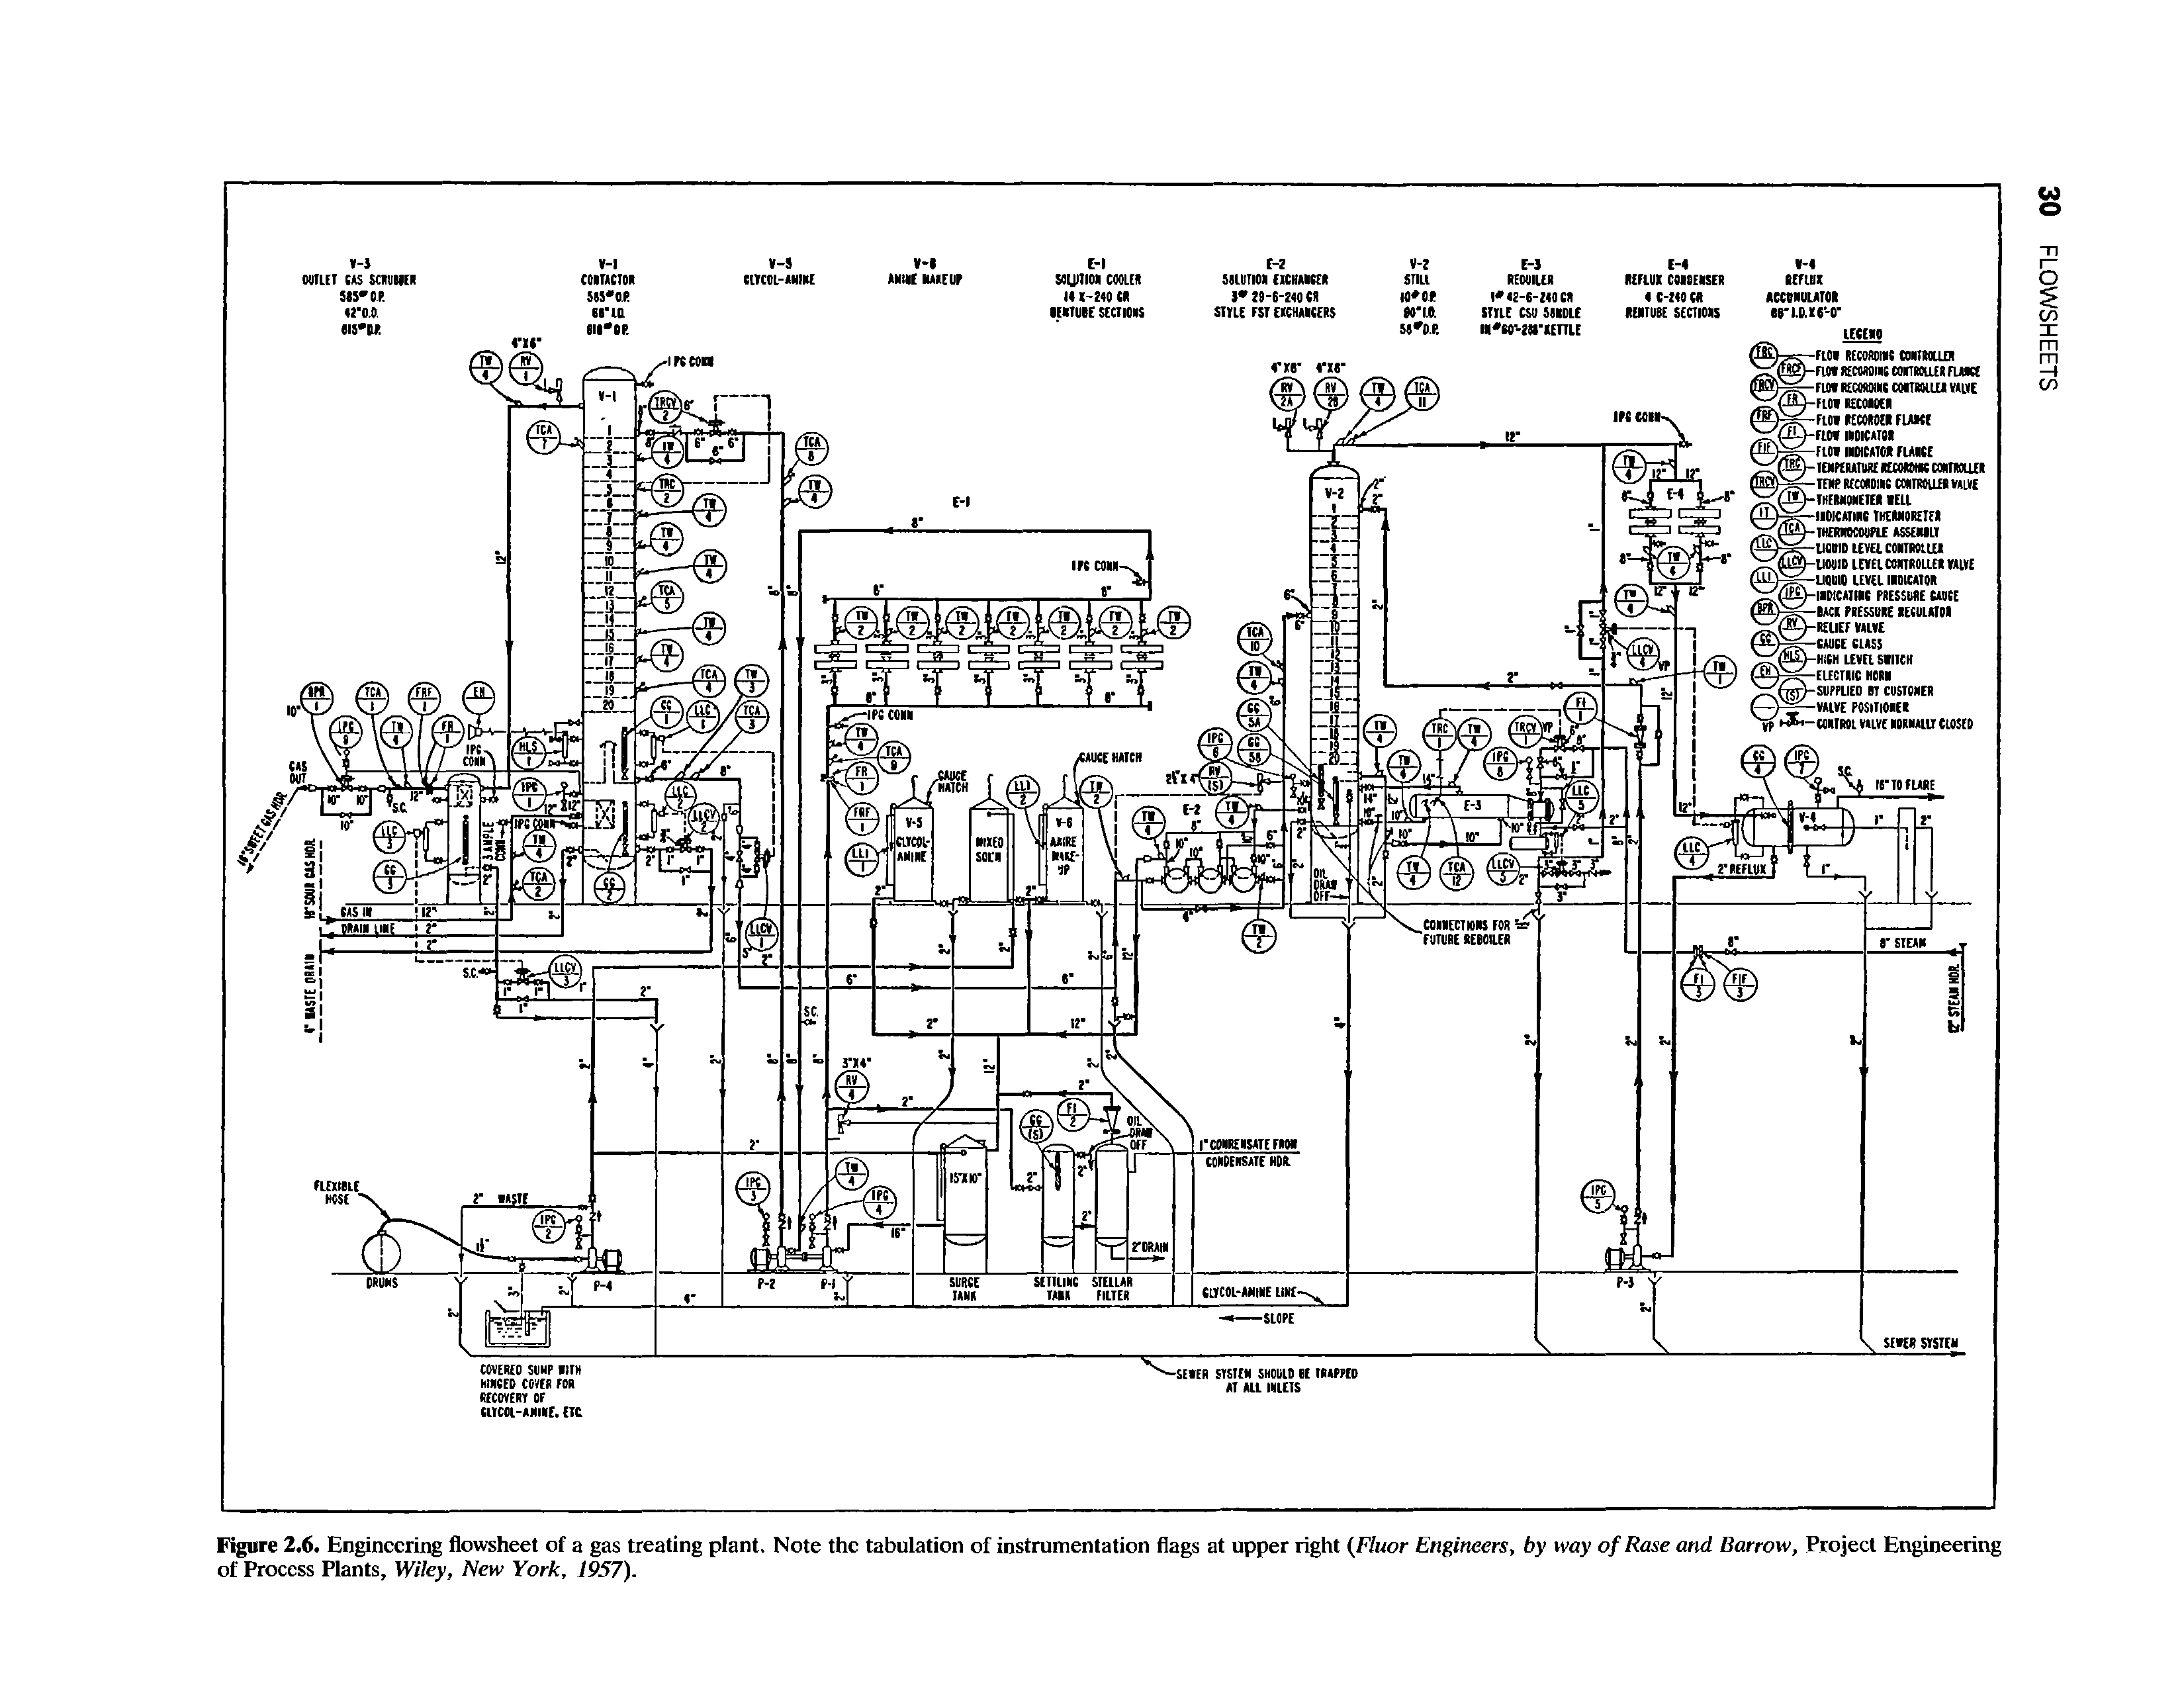 Figure 2.6. Engineering flowsheet of a gas treating plant. Note the tabulation of instrumentation flags at upper right (Fluor Engineers, by way of Rase and Barrow, Project Engineering of Process Plants, Wiley, New York, 1957).